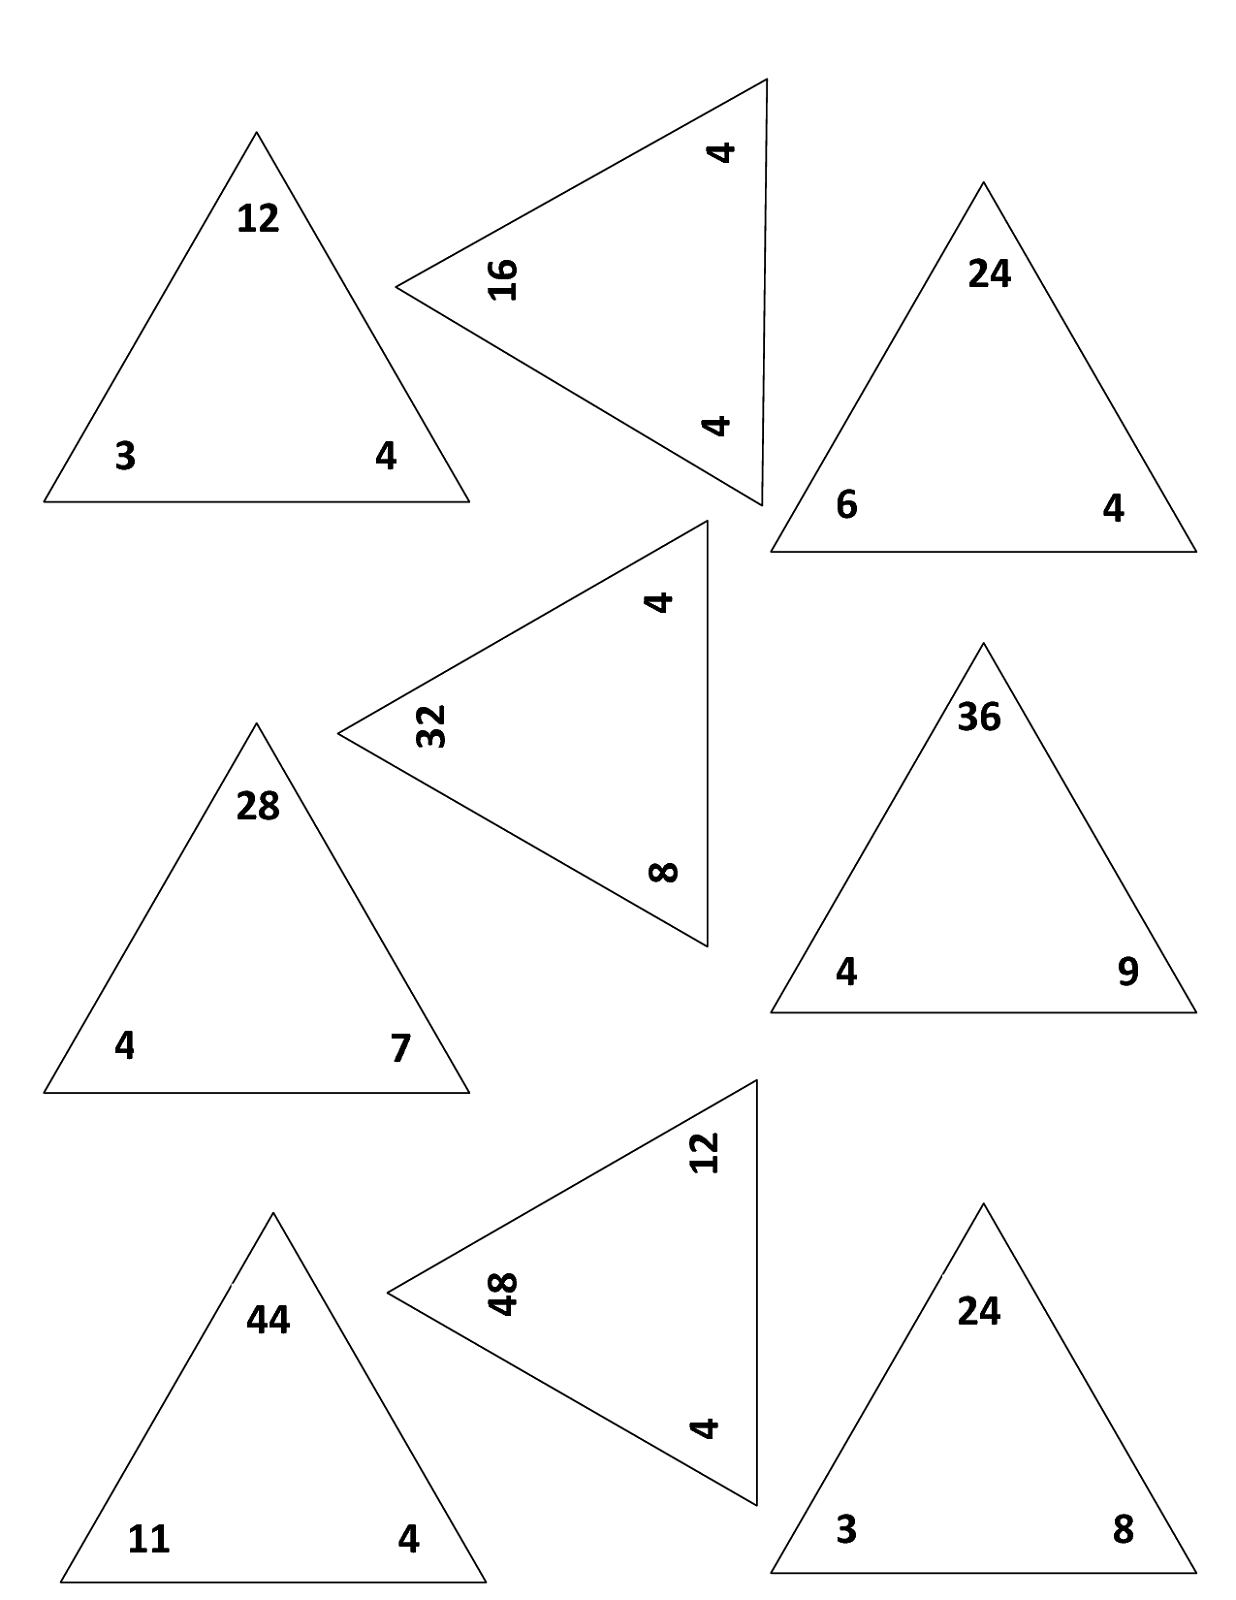 Addition And Subtraction Fact Family Triangle Worksheets - addition